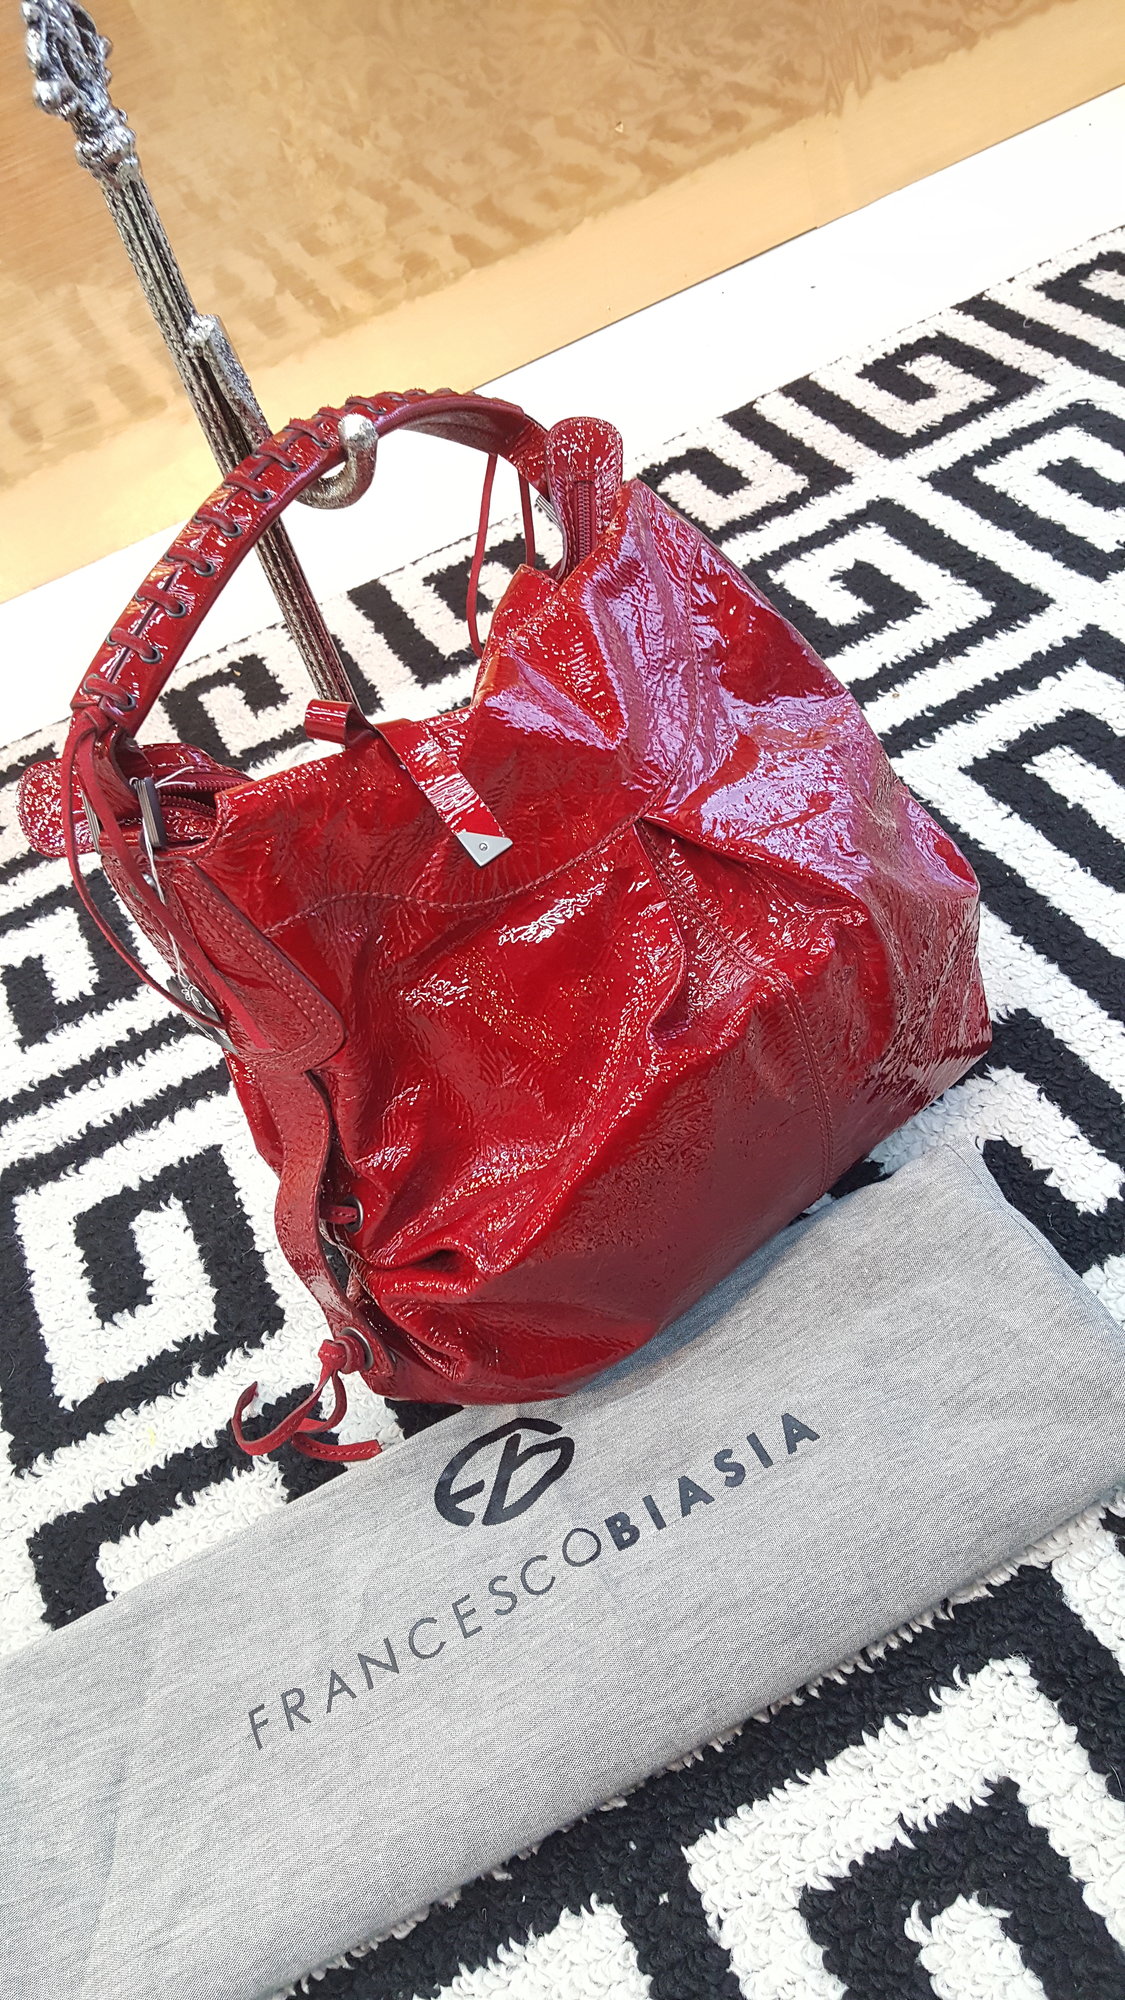 BRAND NEW, Francesco Biasia hobo handbag, red patent leather with smoky silver hardware, with duster bag